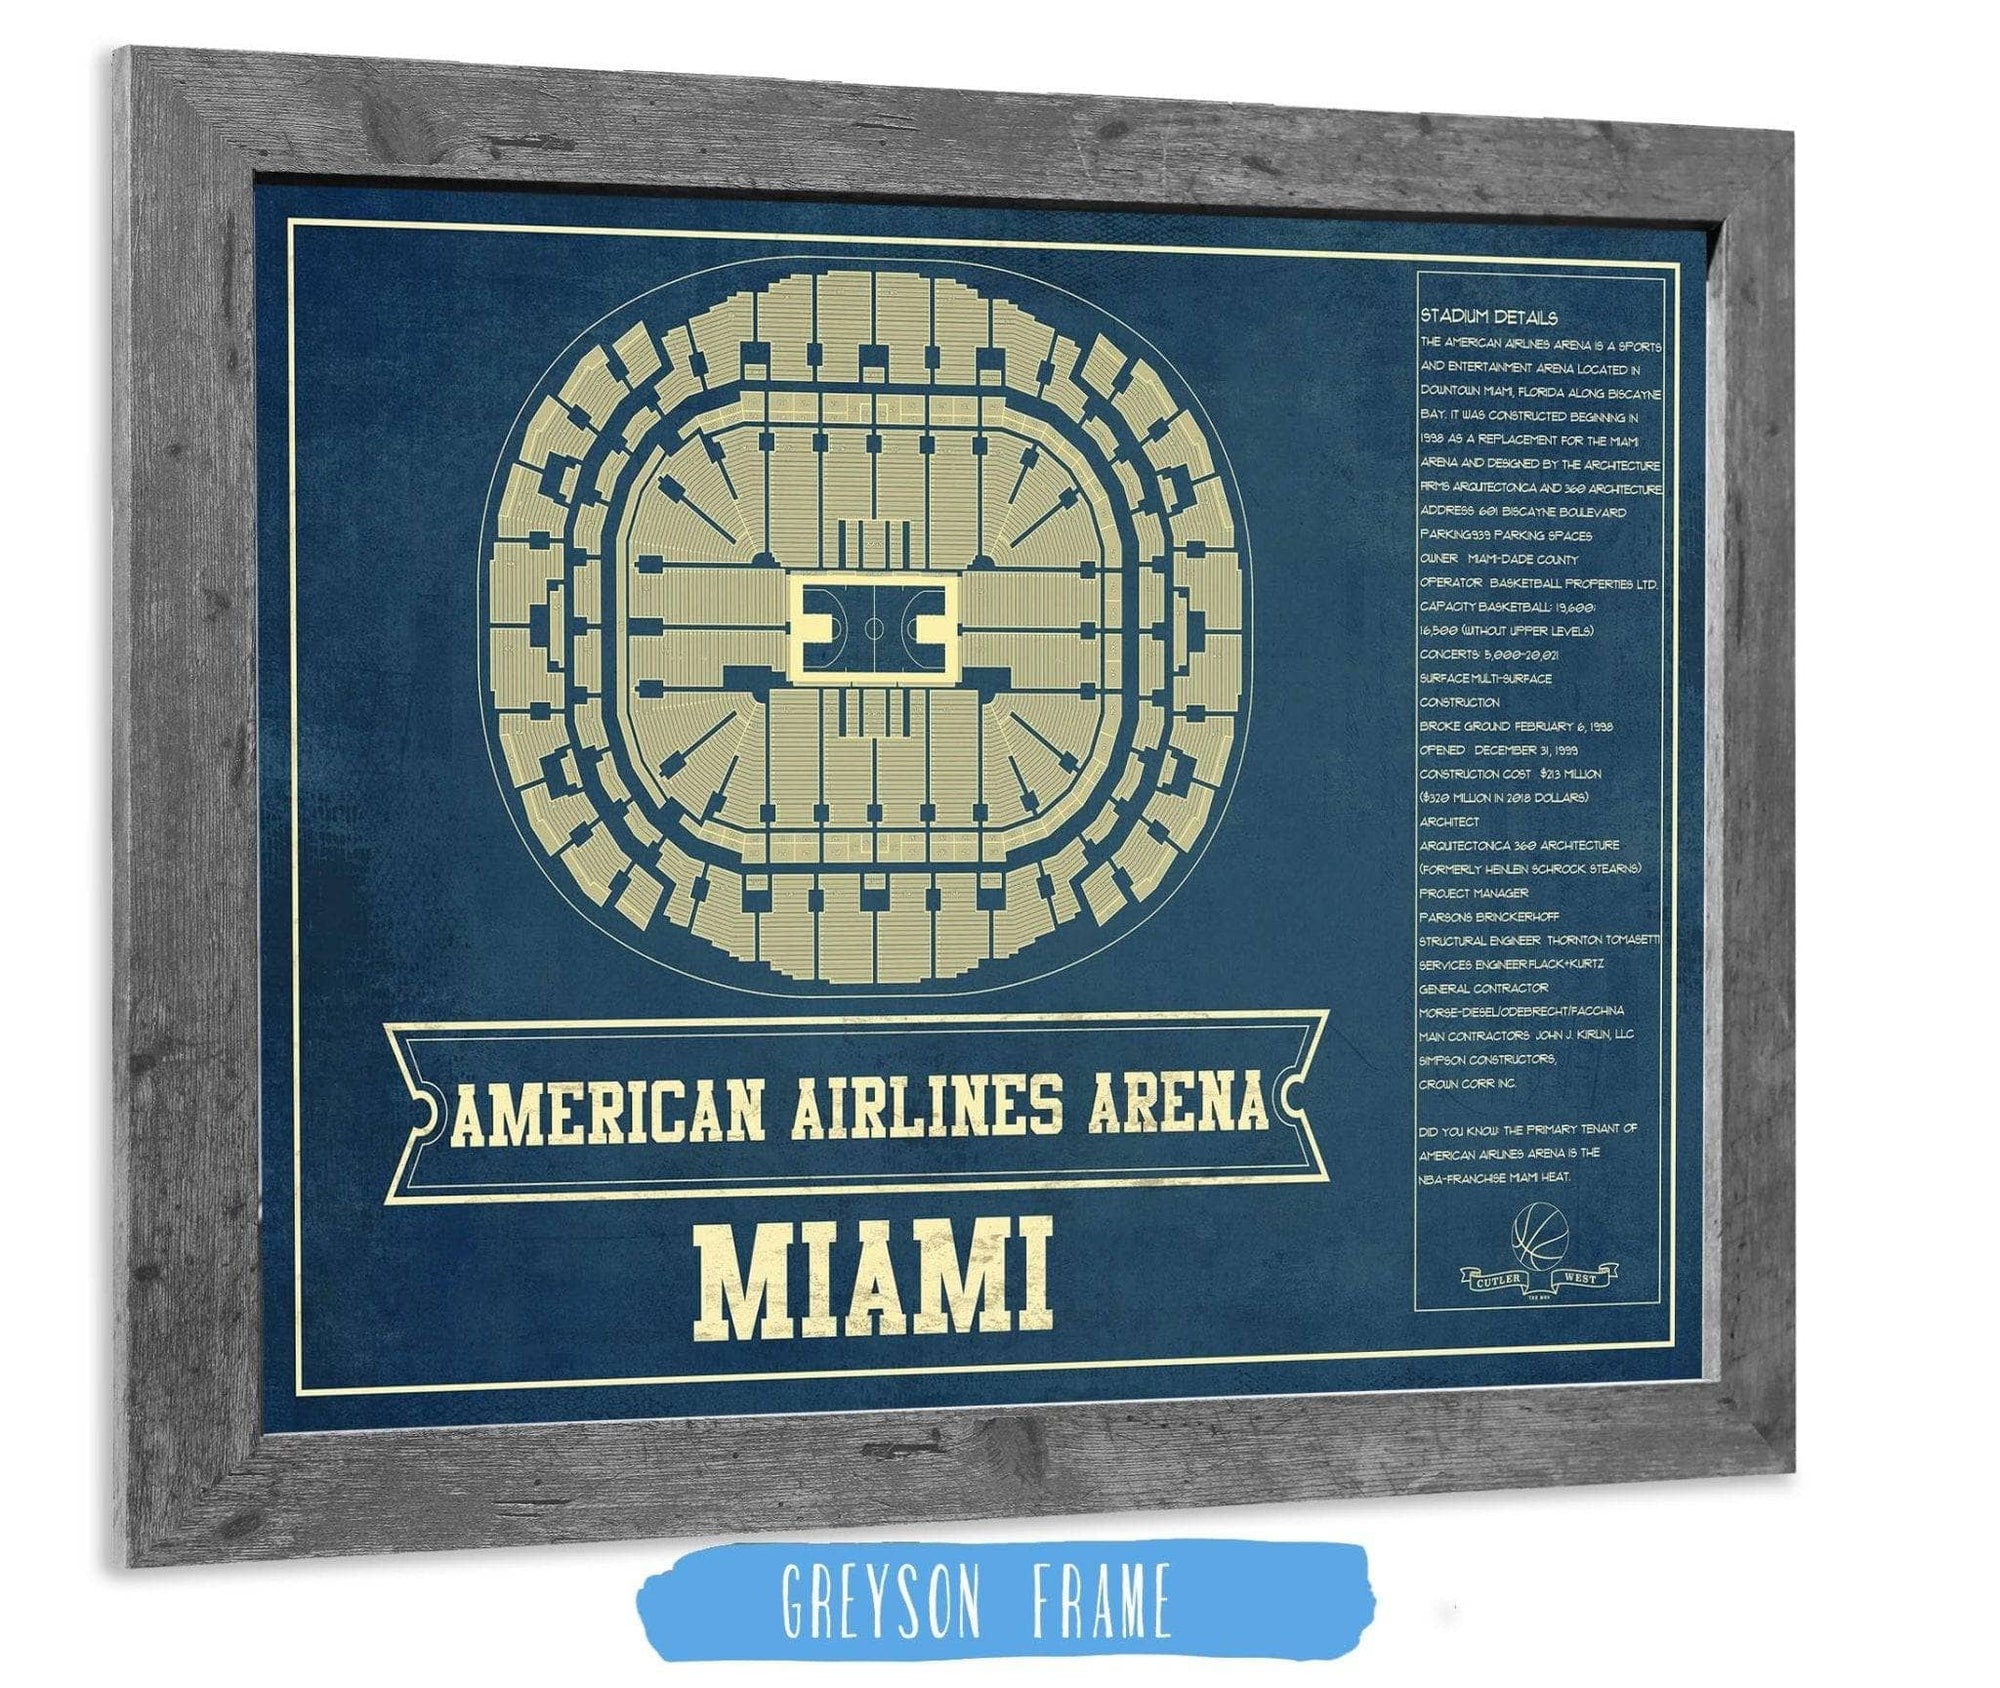 Cutler West Basketball Collection 14" x 11" / Greyson Frame Miami Heat - American Airlines Arena Vintage Basketball Blueprint NBA Print 675082021_76834